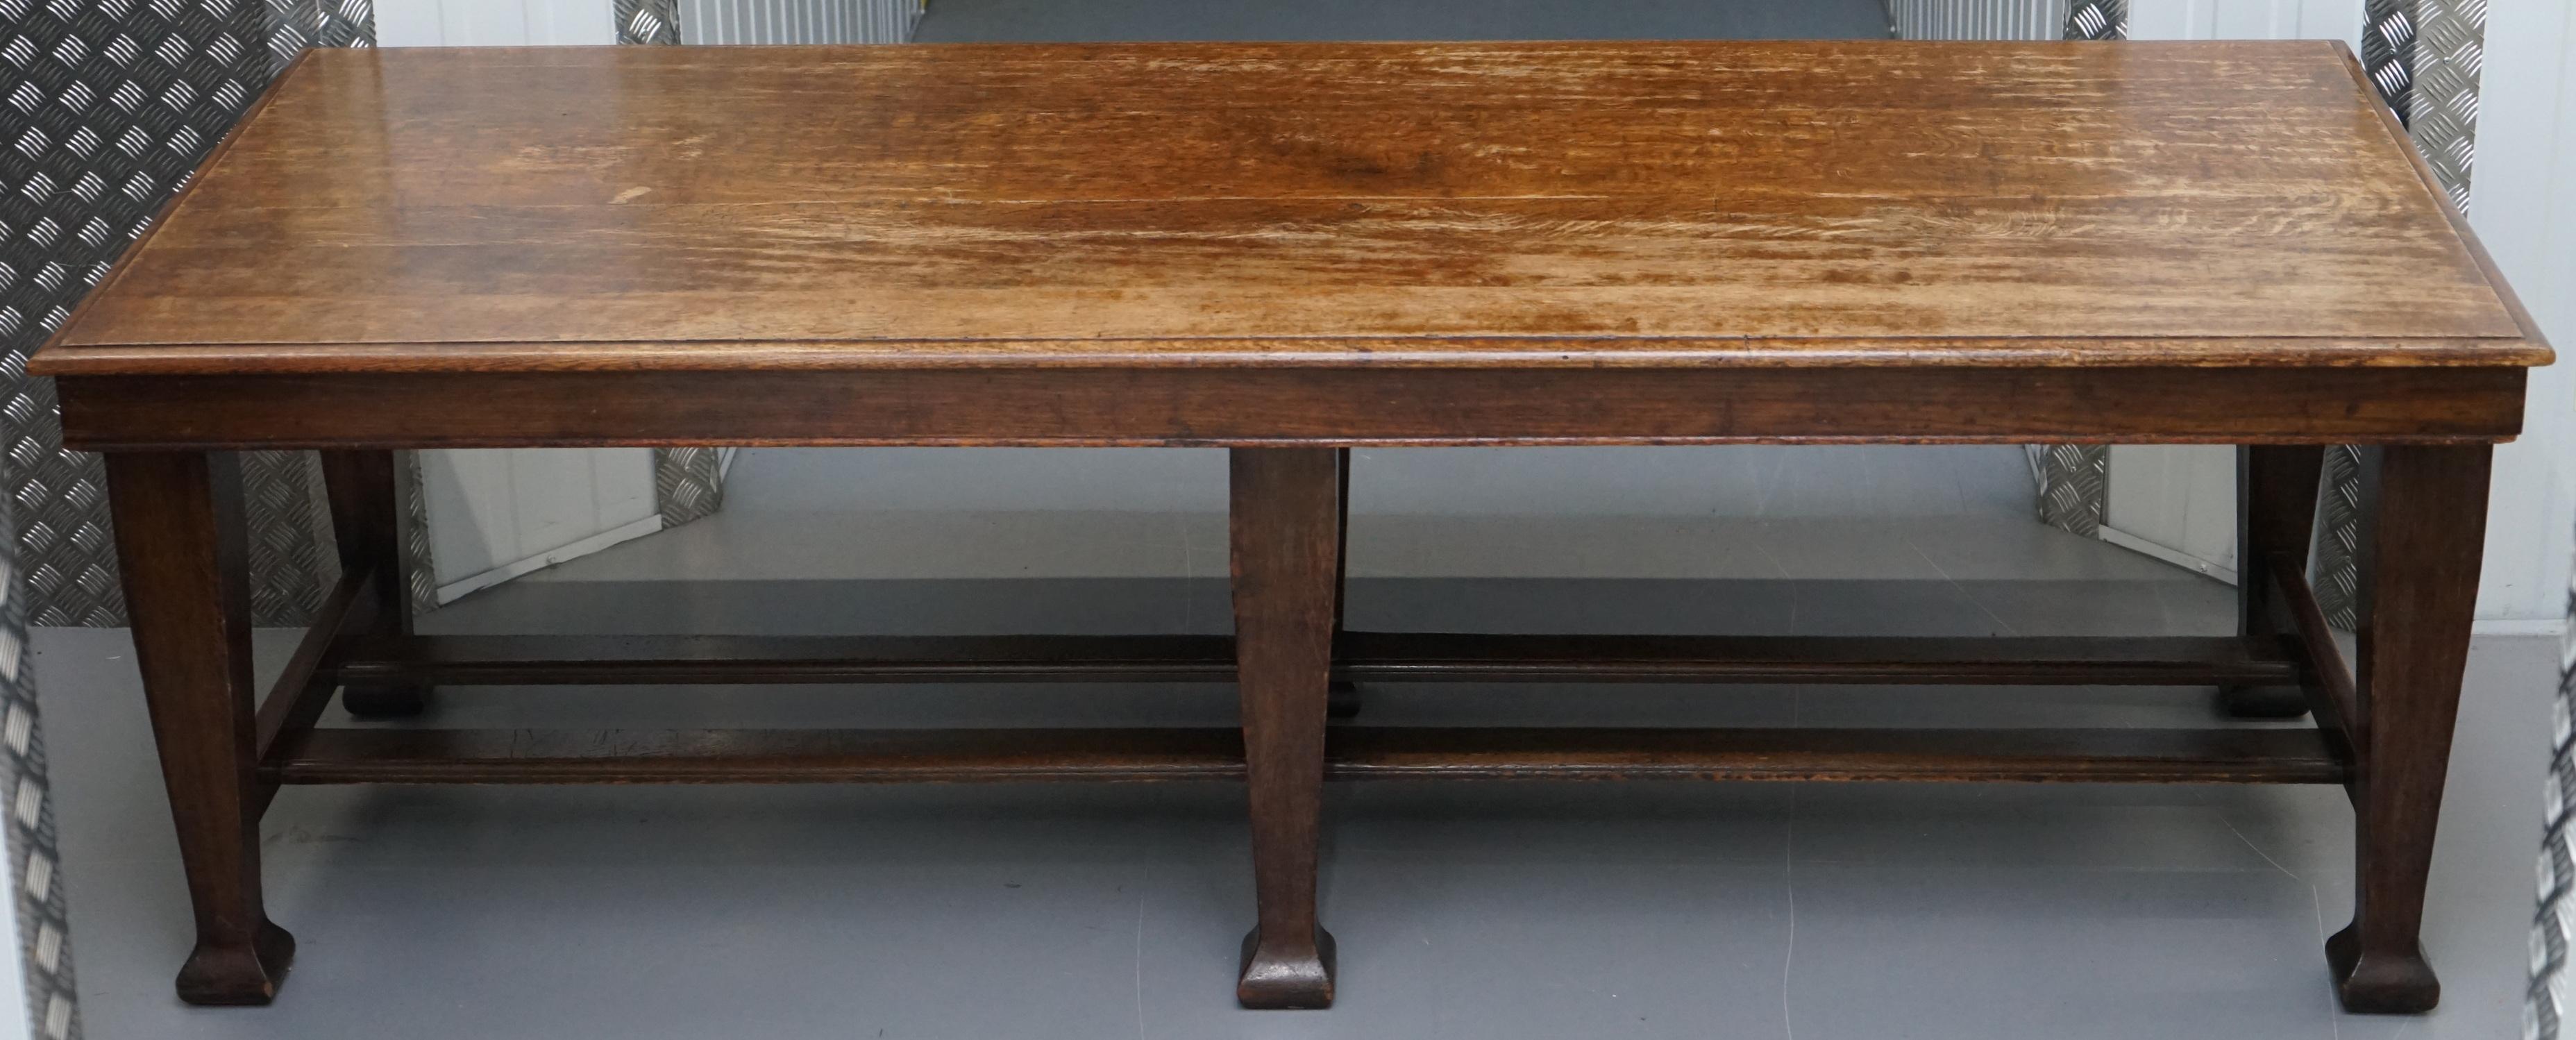 We are delighted to this stunning circa 1840 Irish Refectory Scrub table of substantial proportions

A very good looking and well-made refectory or scrub table, it has the typical Irish country twin stretchers, the tabletop is dowelled and